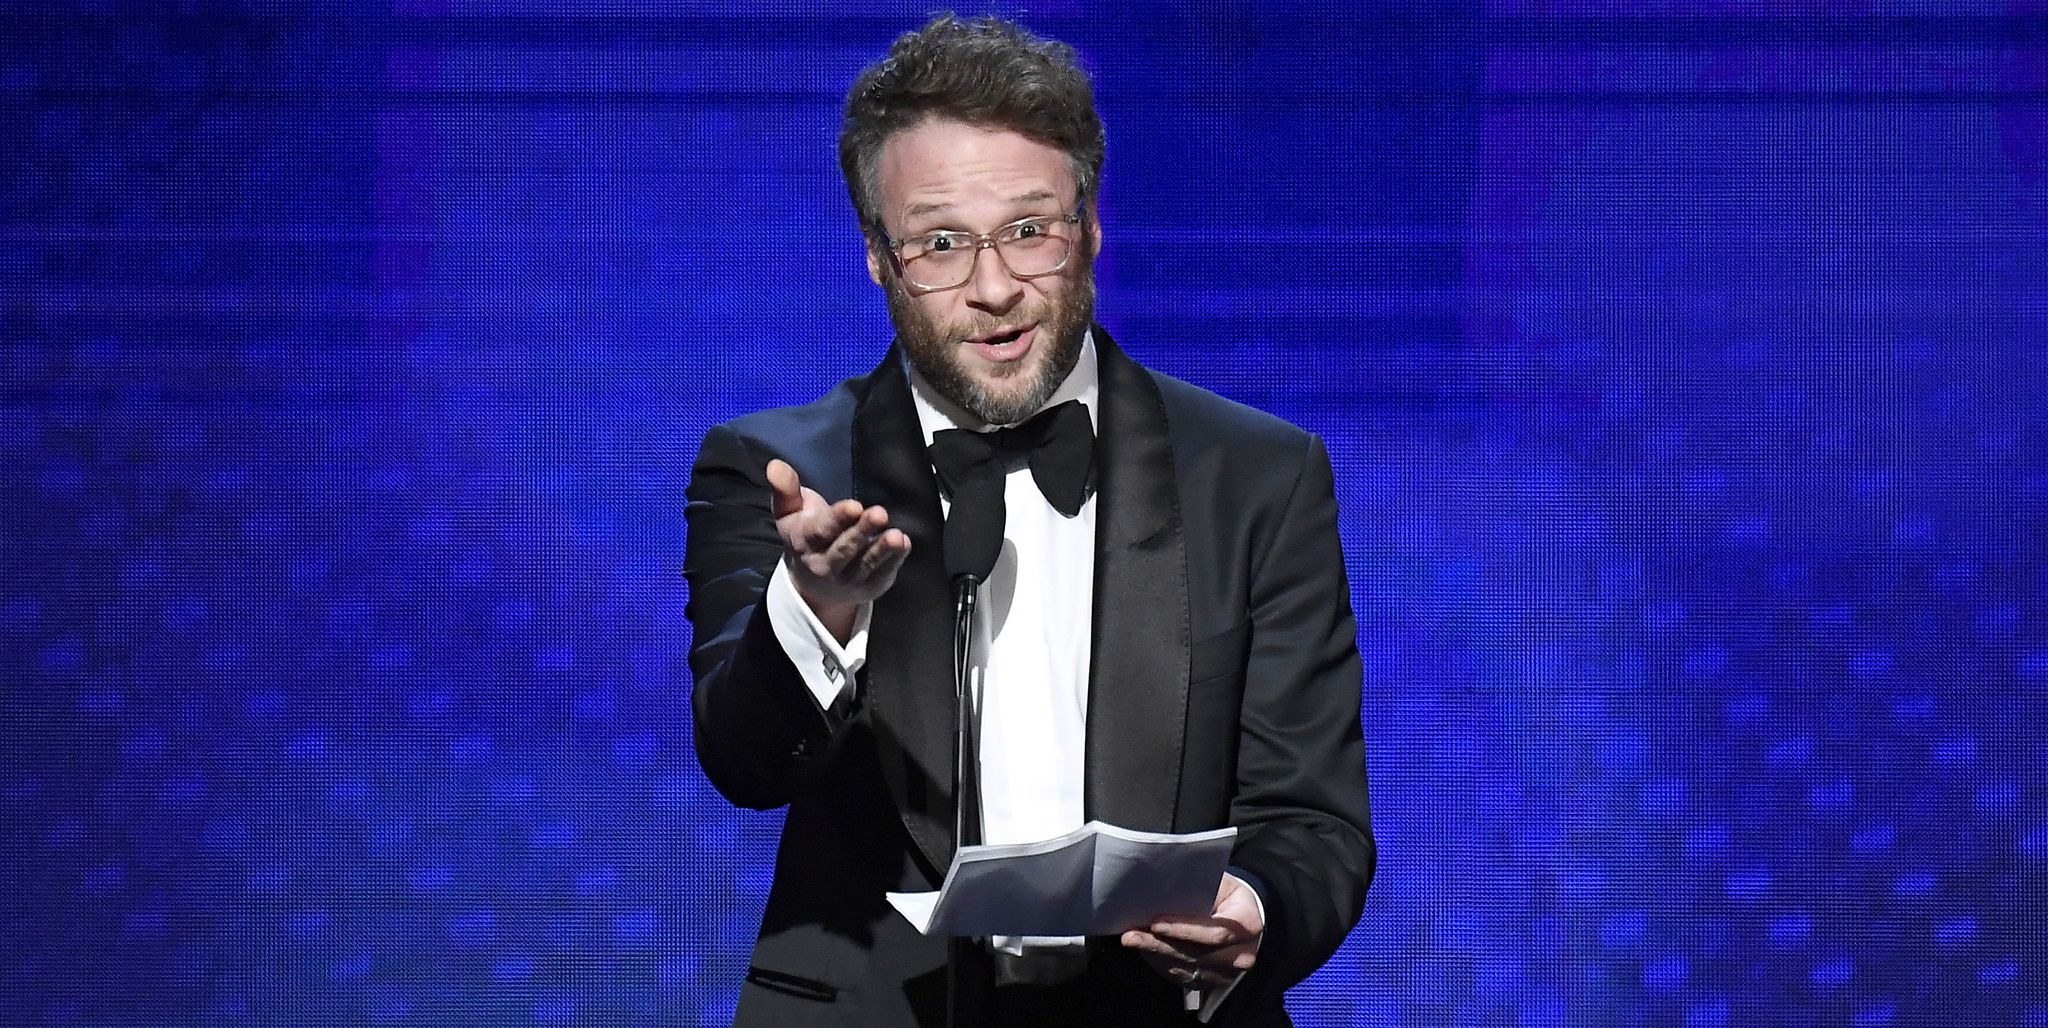 beverly hills, california   november 08 seth rogen speaks onstage during the 33rd american cinematheque award presentation honoring charlize theron at the beverly hilton hotel on november 08, 2019 in beverly hills, california photo by frazer harrisongetty images